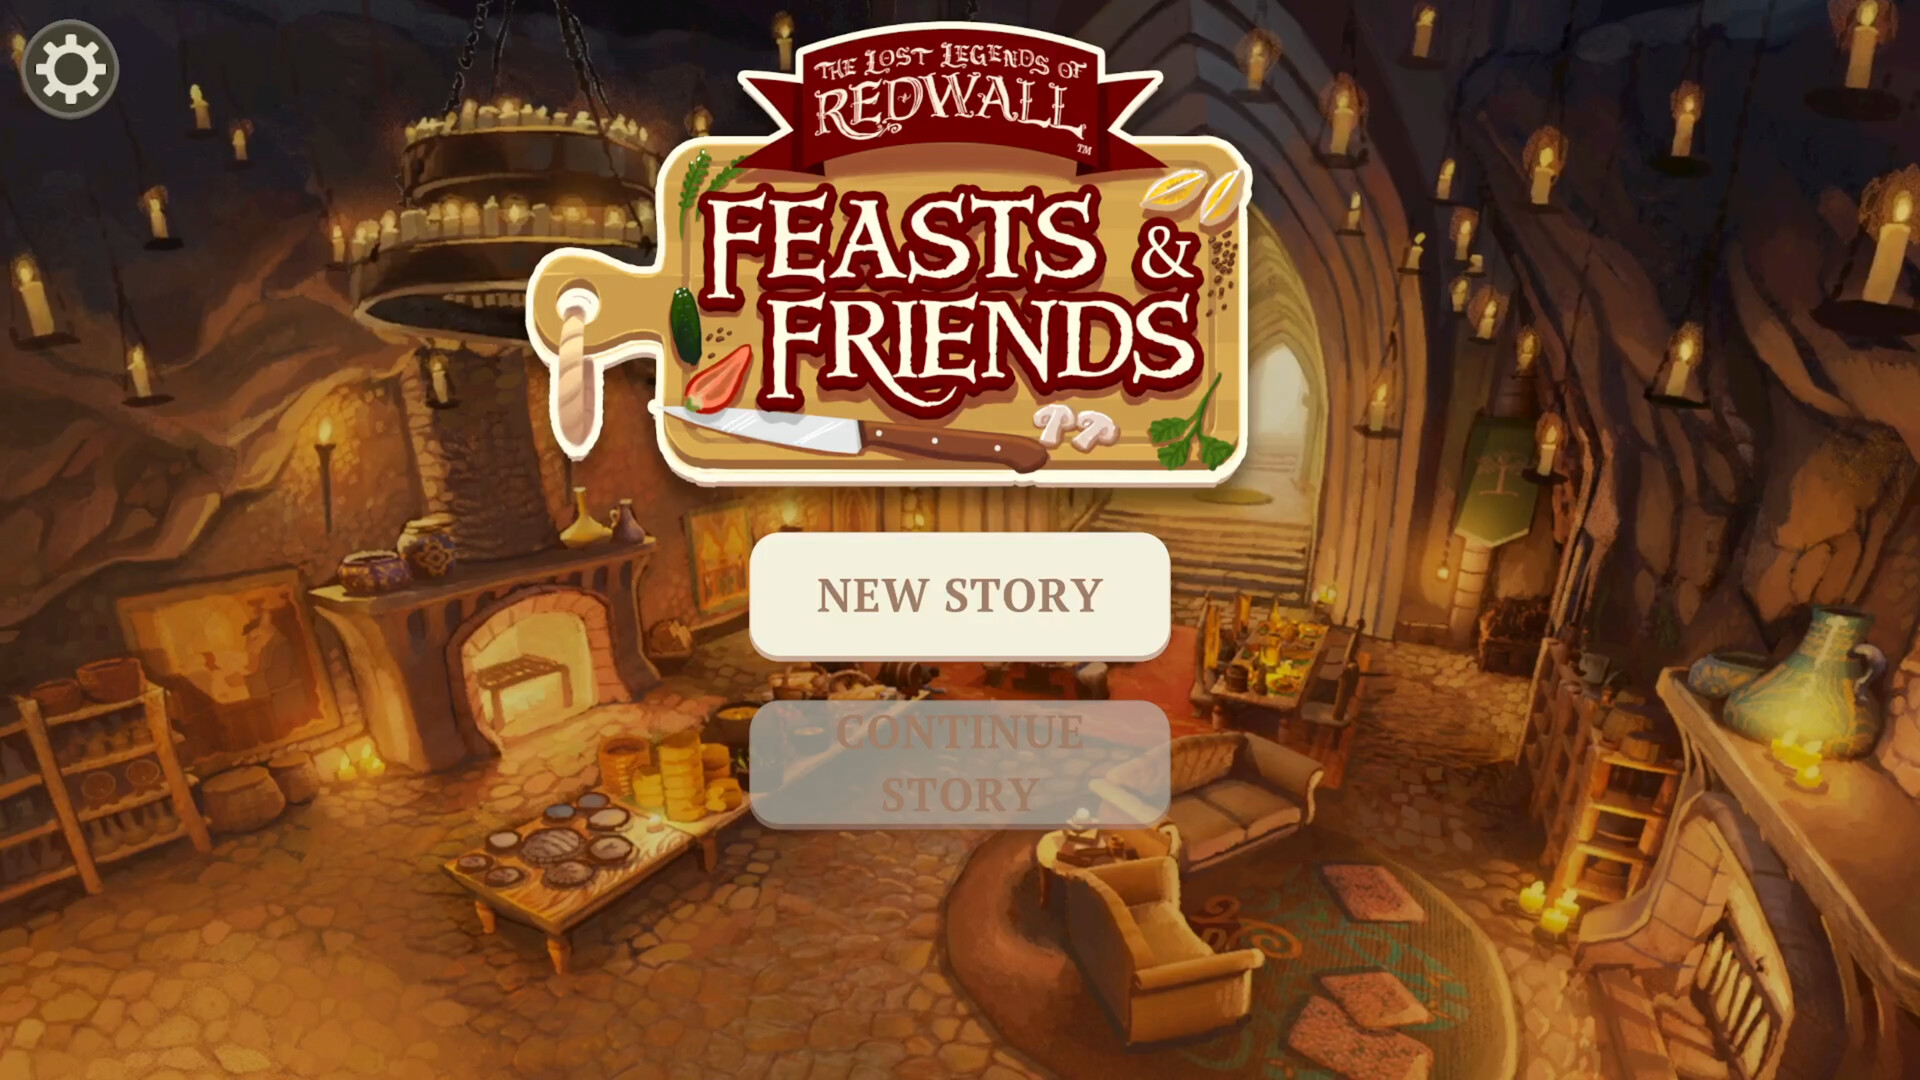 The Lost Legends of Redwall: Feasts & Friends Steam CD Key 3.38 $